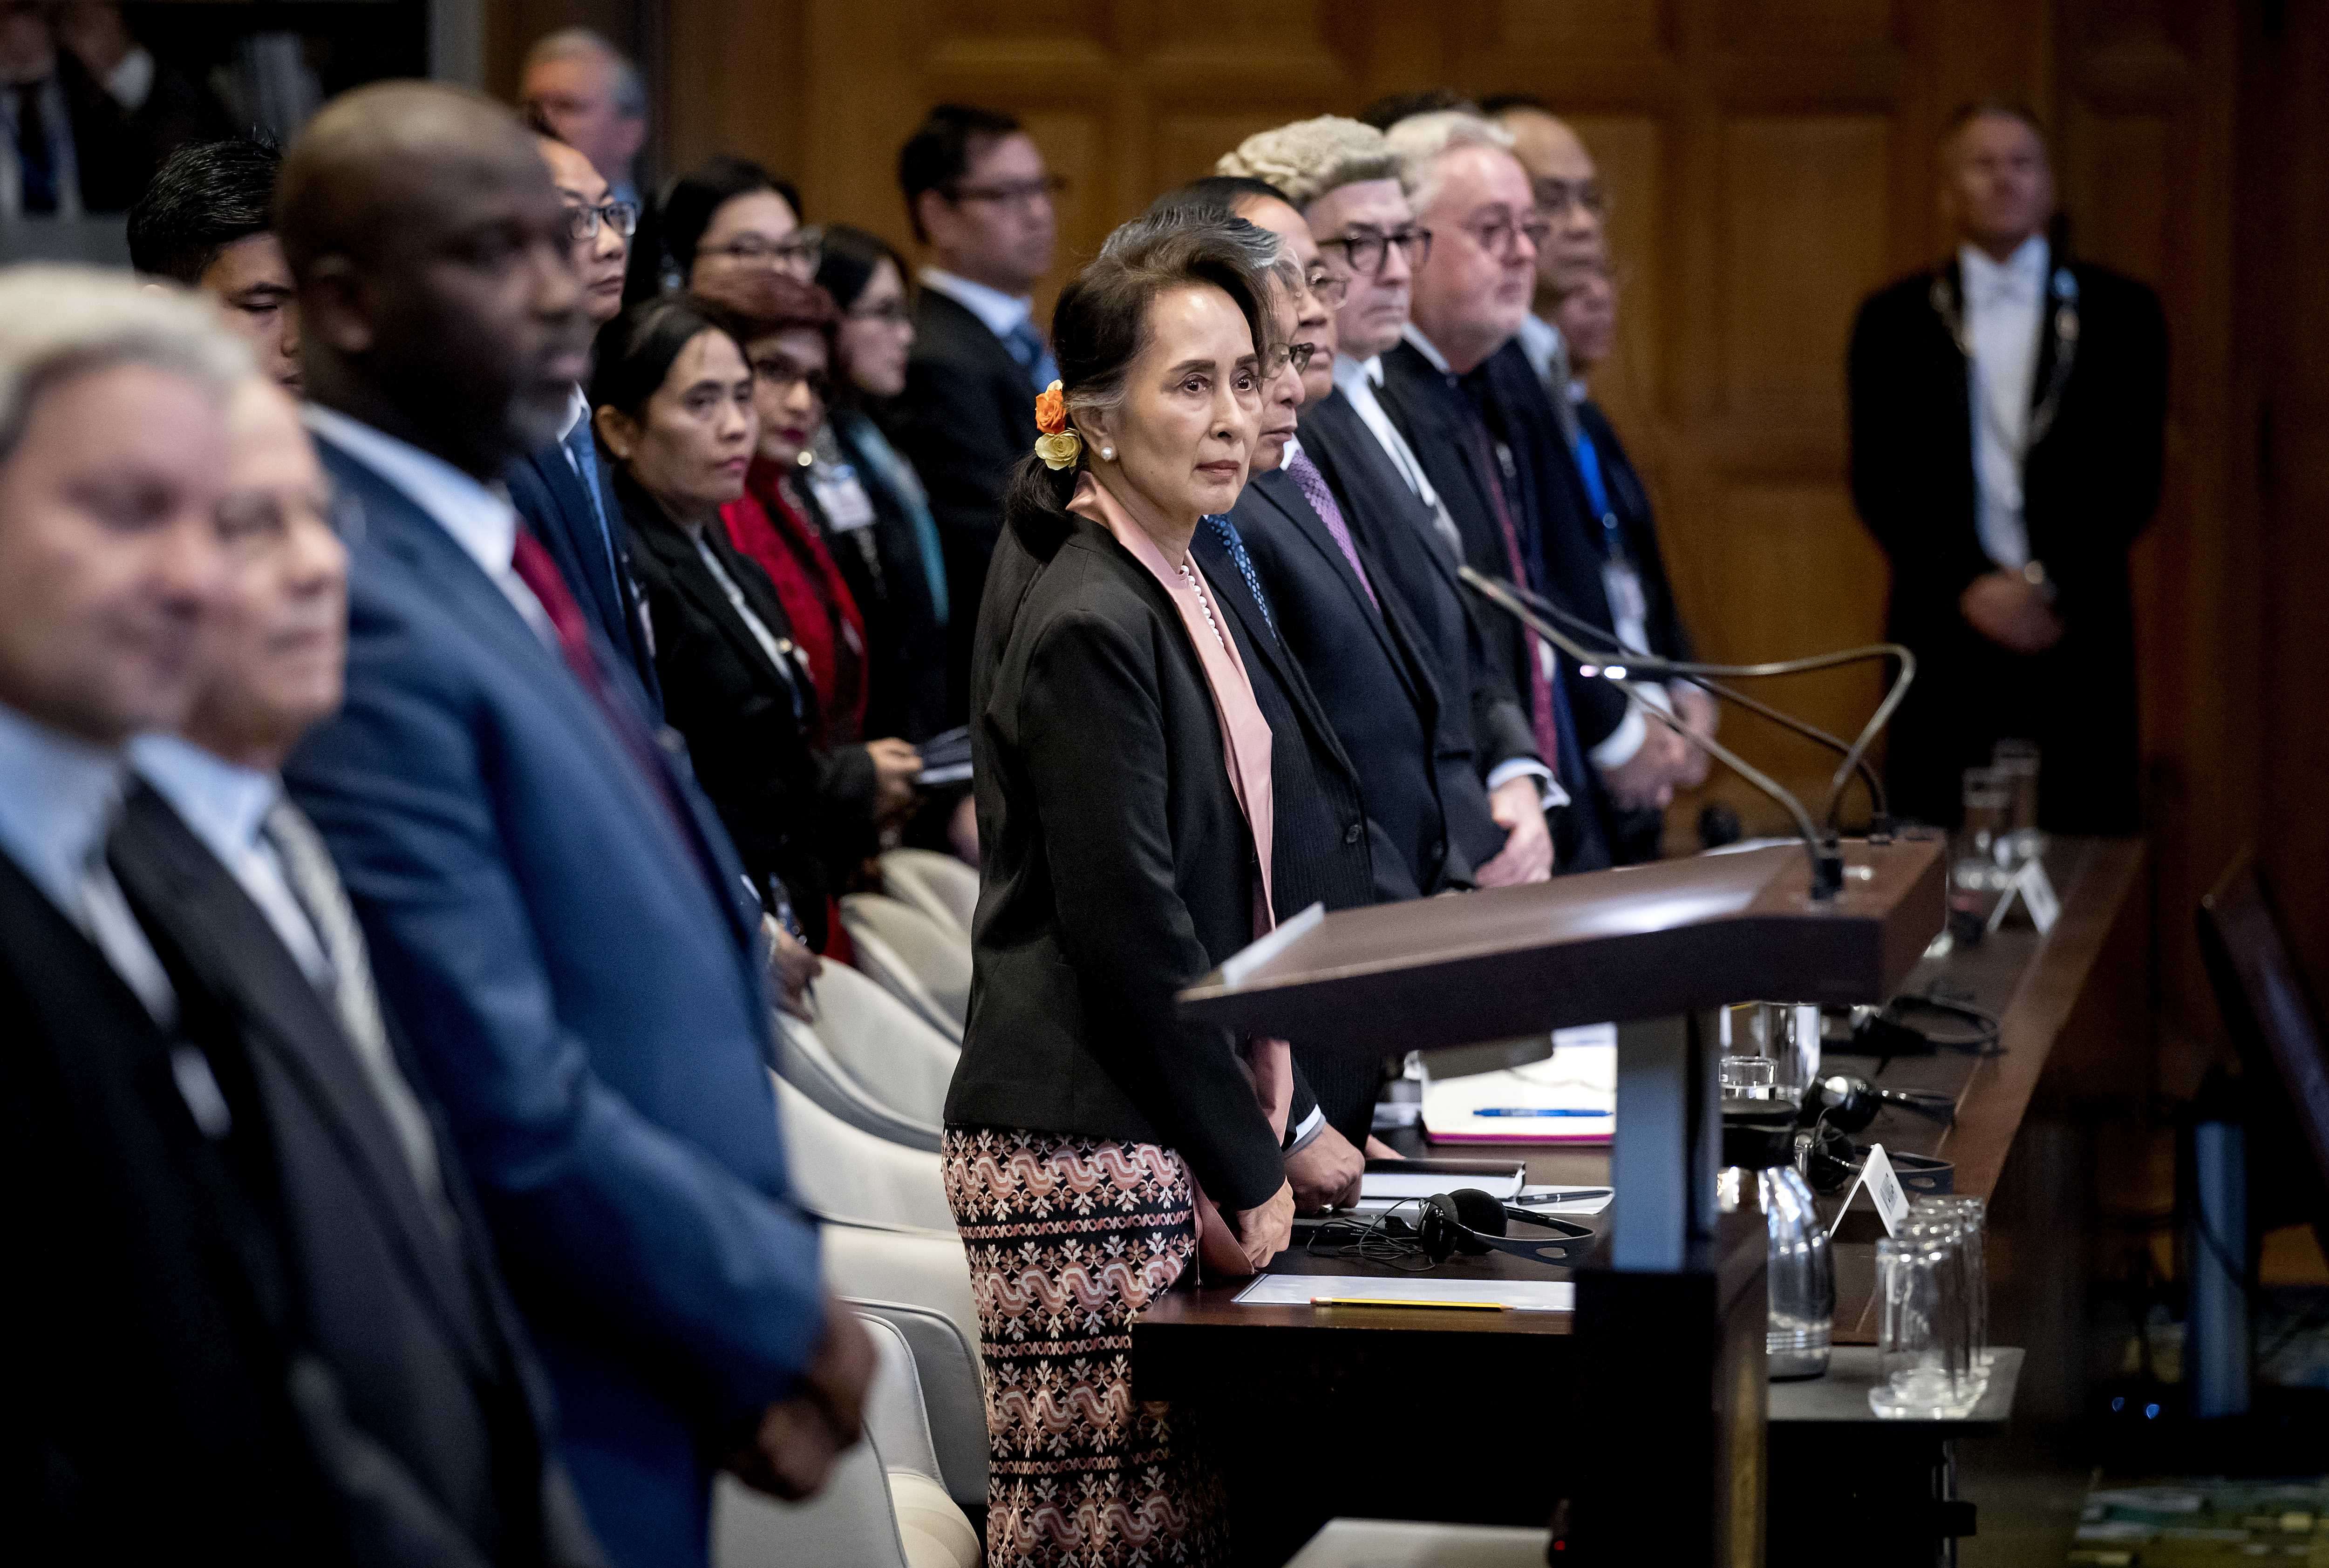 Aung San Suu Kyi appears before the International Court of Justice at The Hague in 2019